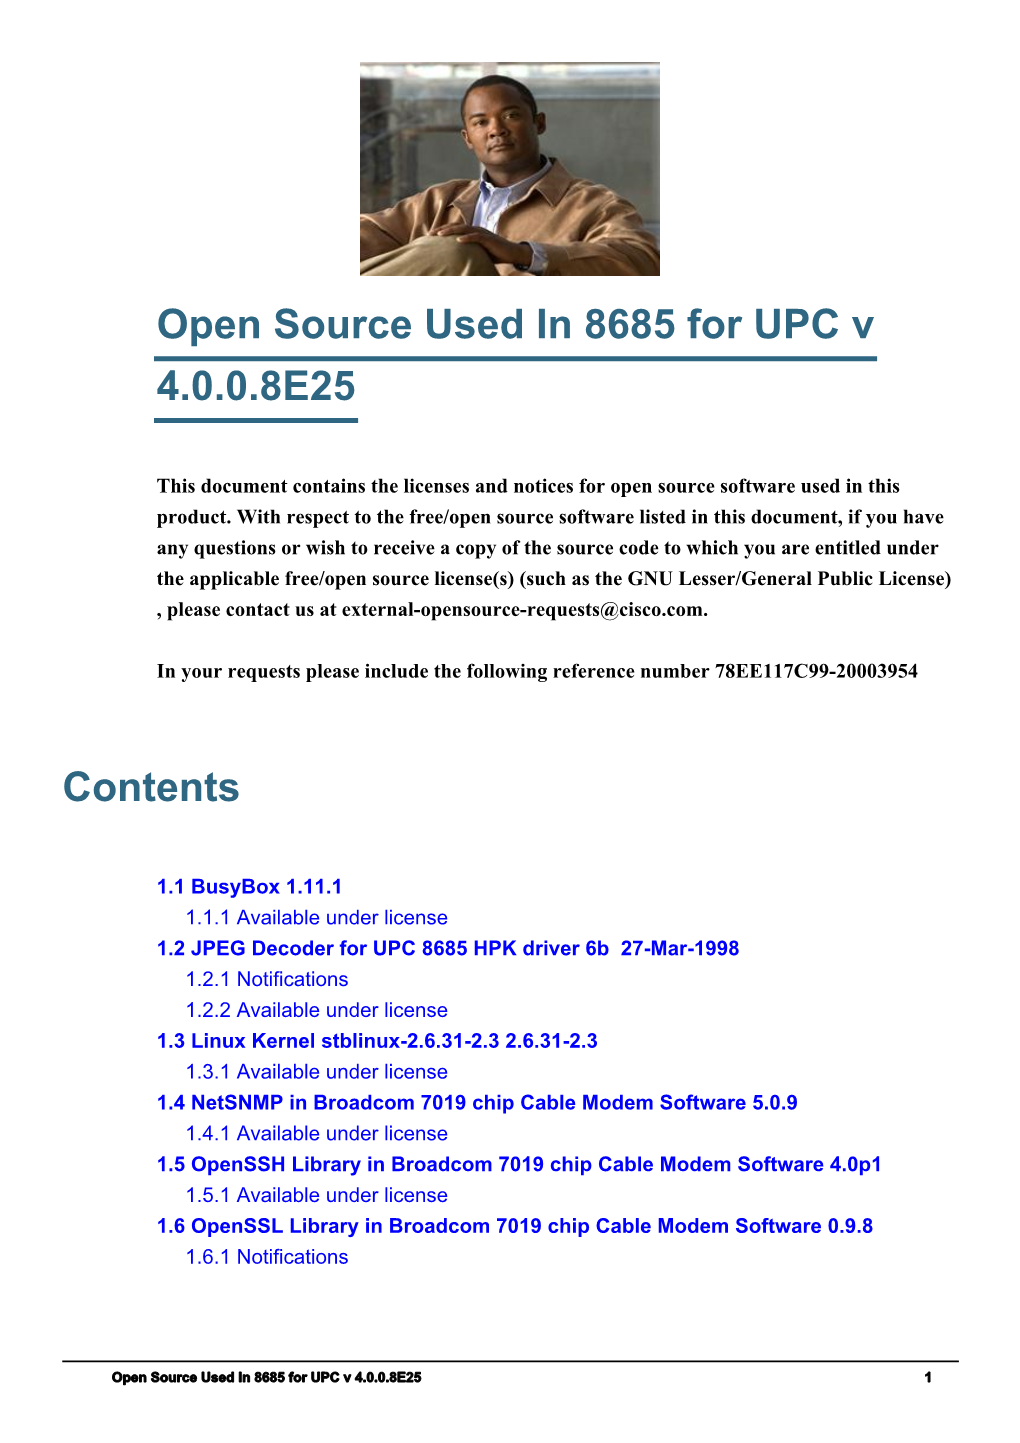 Open Source Used in 8685 for UPC V 4.0.0.8E25